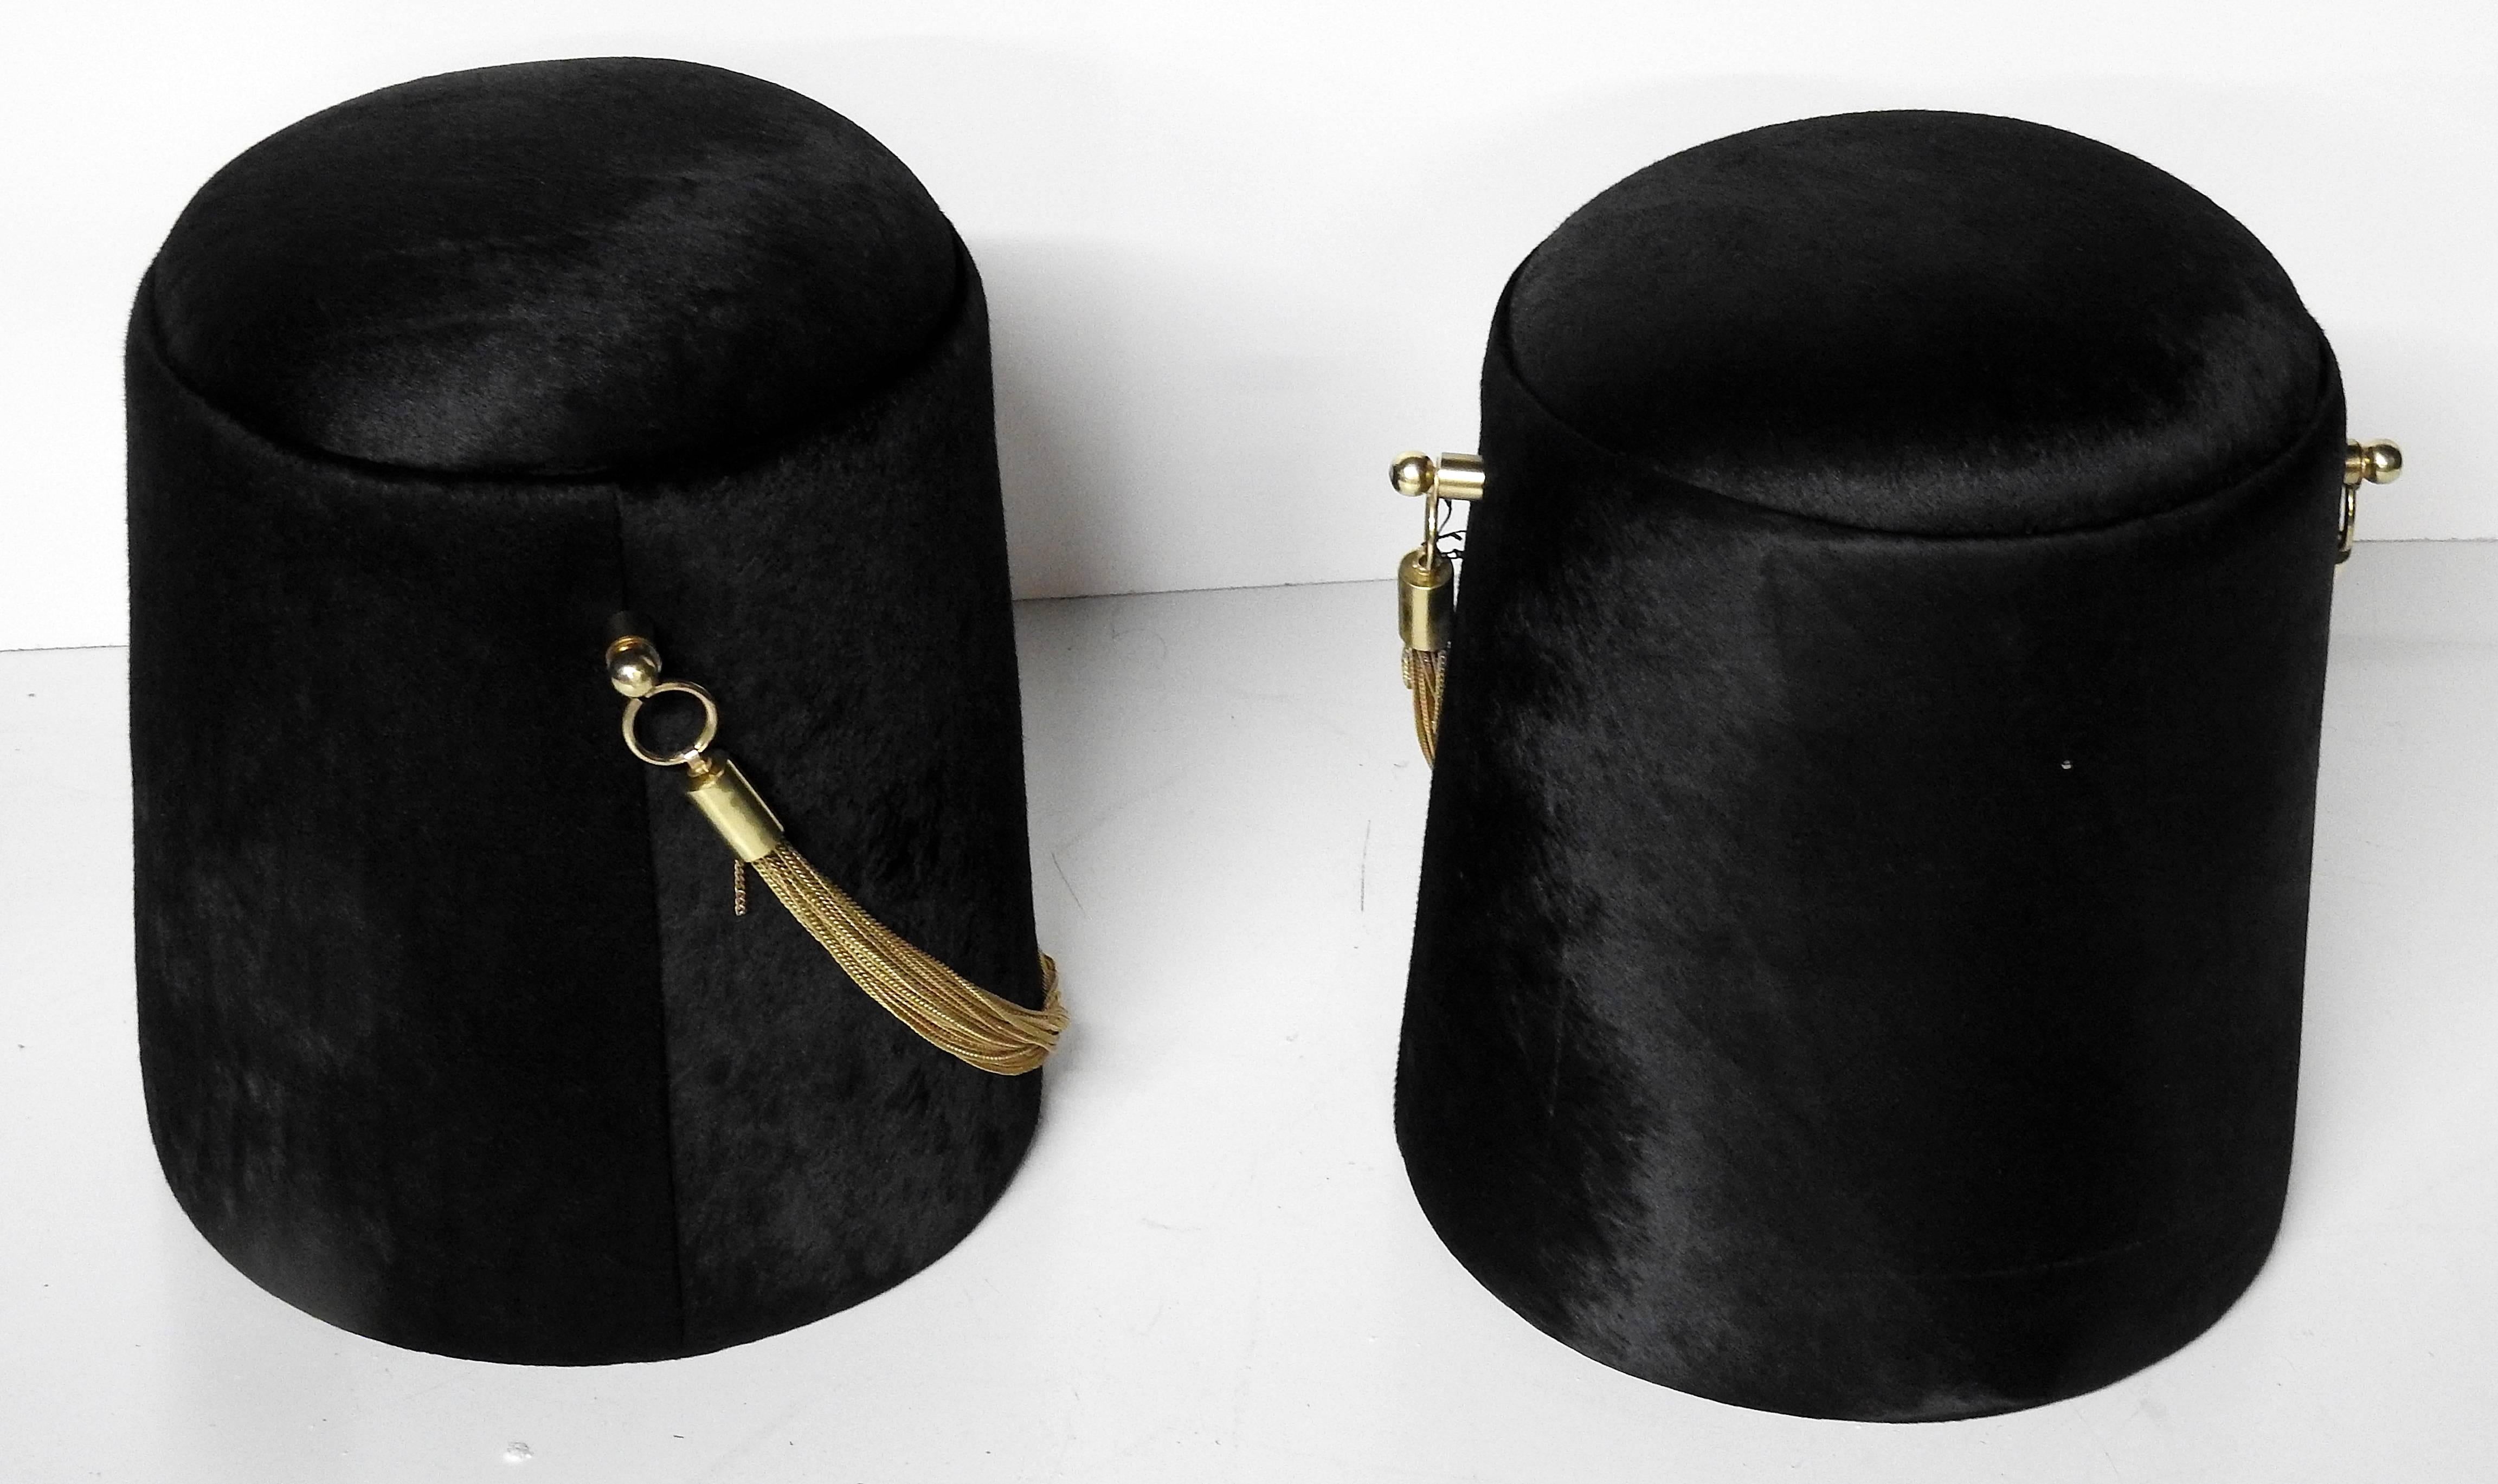 Pair of hair on leather covered poufs reminiscent of the Bearskin of the British foot guards.